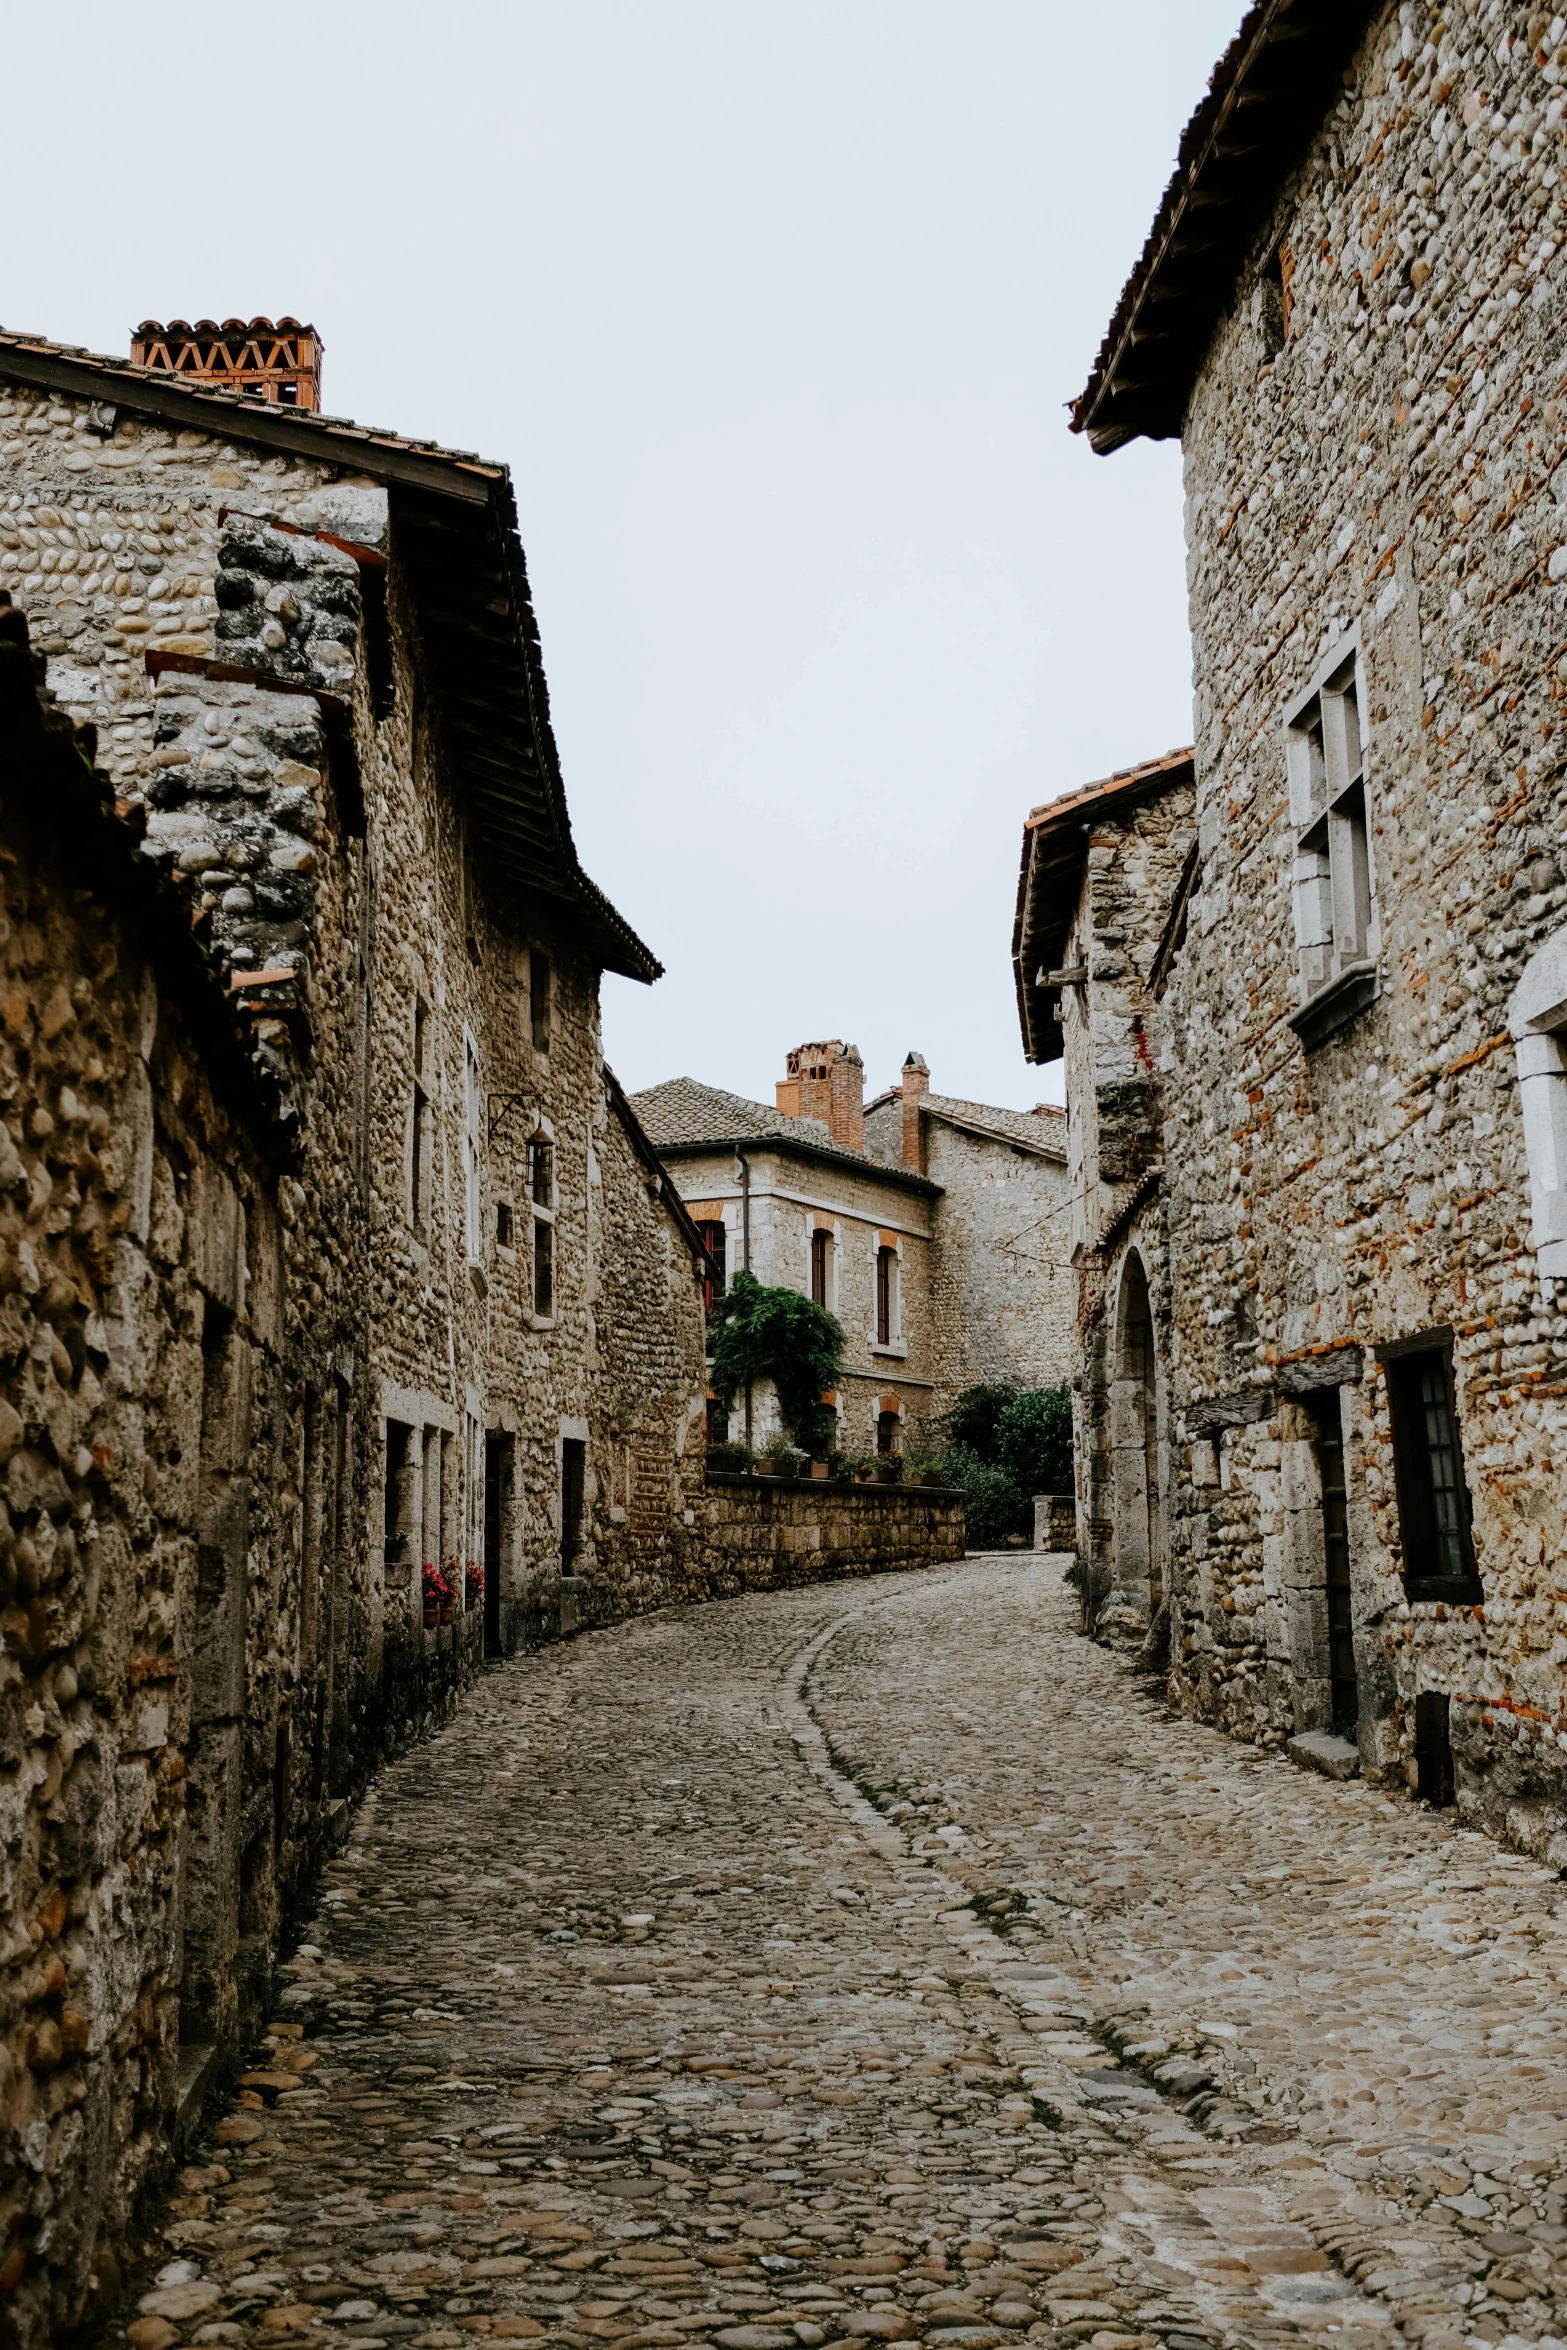 a cobblestone street lined with stone buildings, pexels contest winner, romanesque, french village interior, sleepy, top down photo, thin